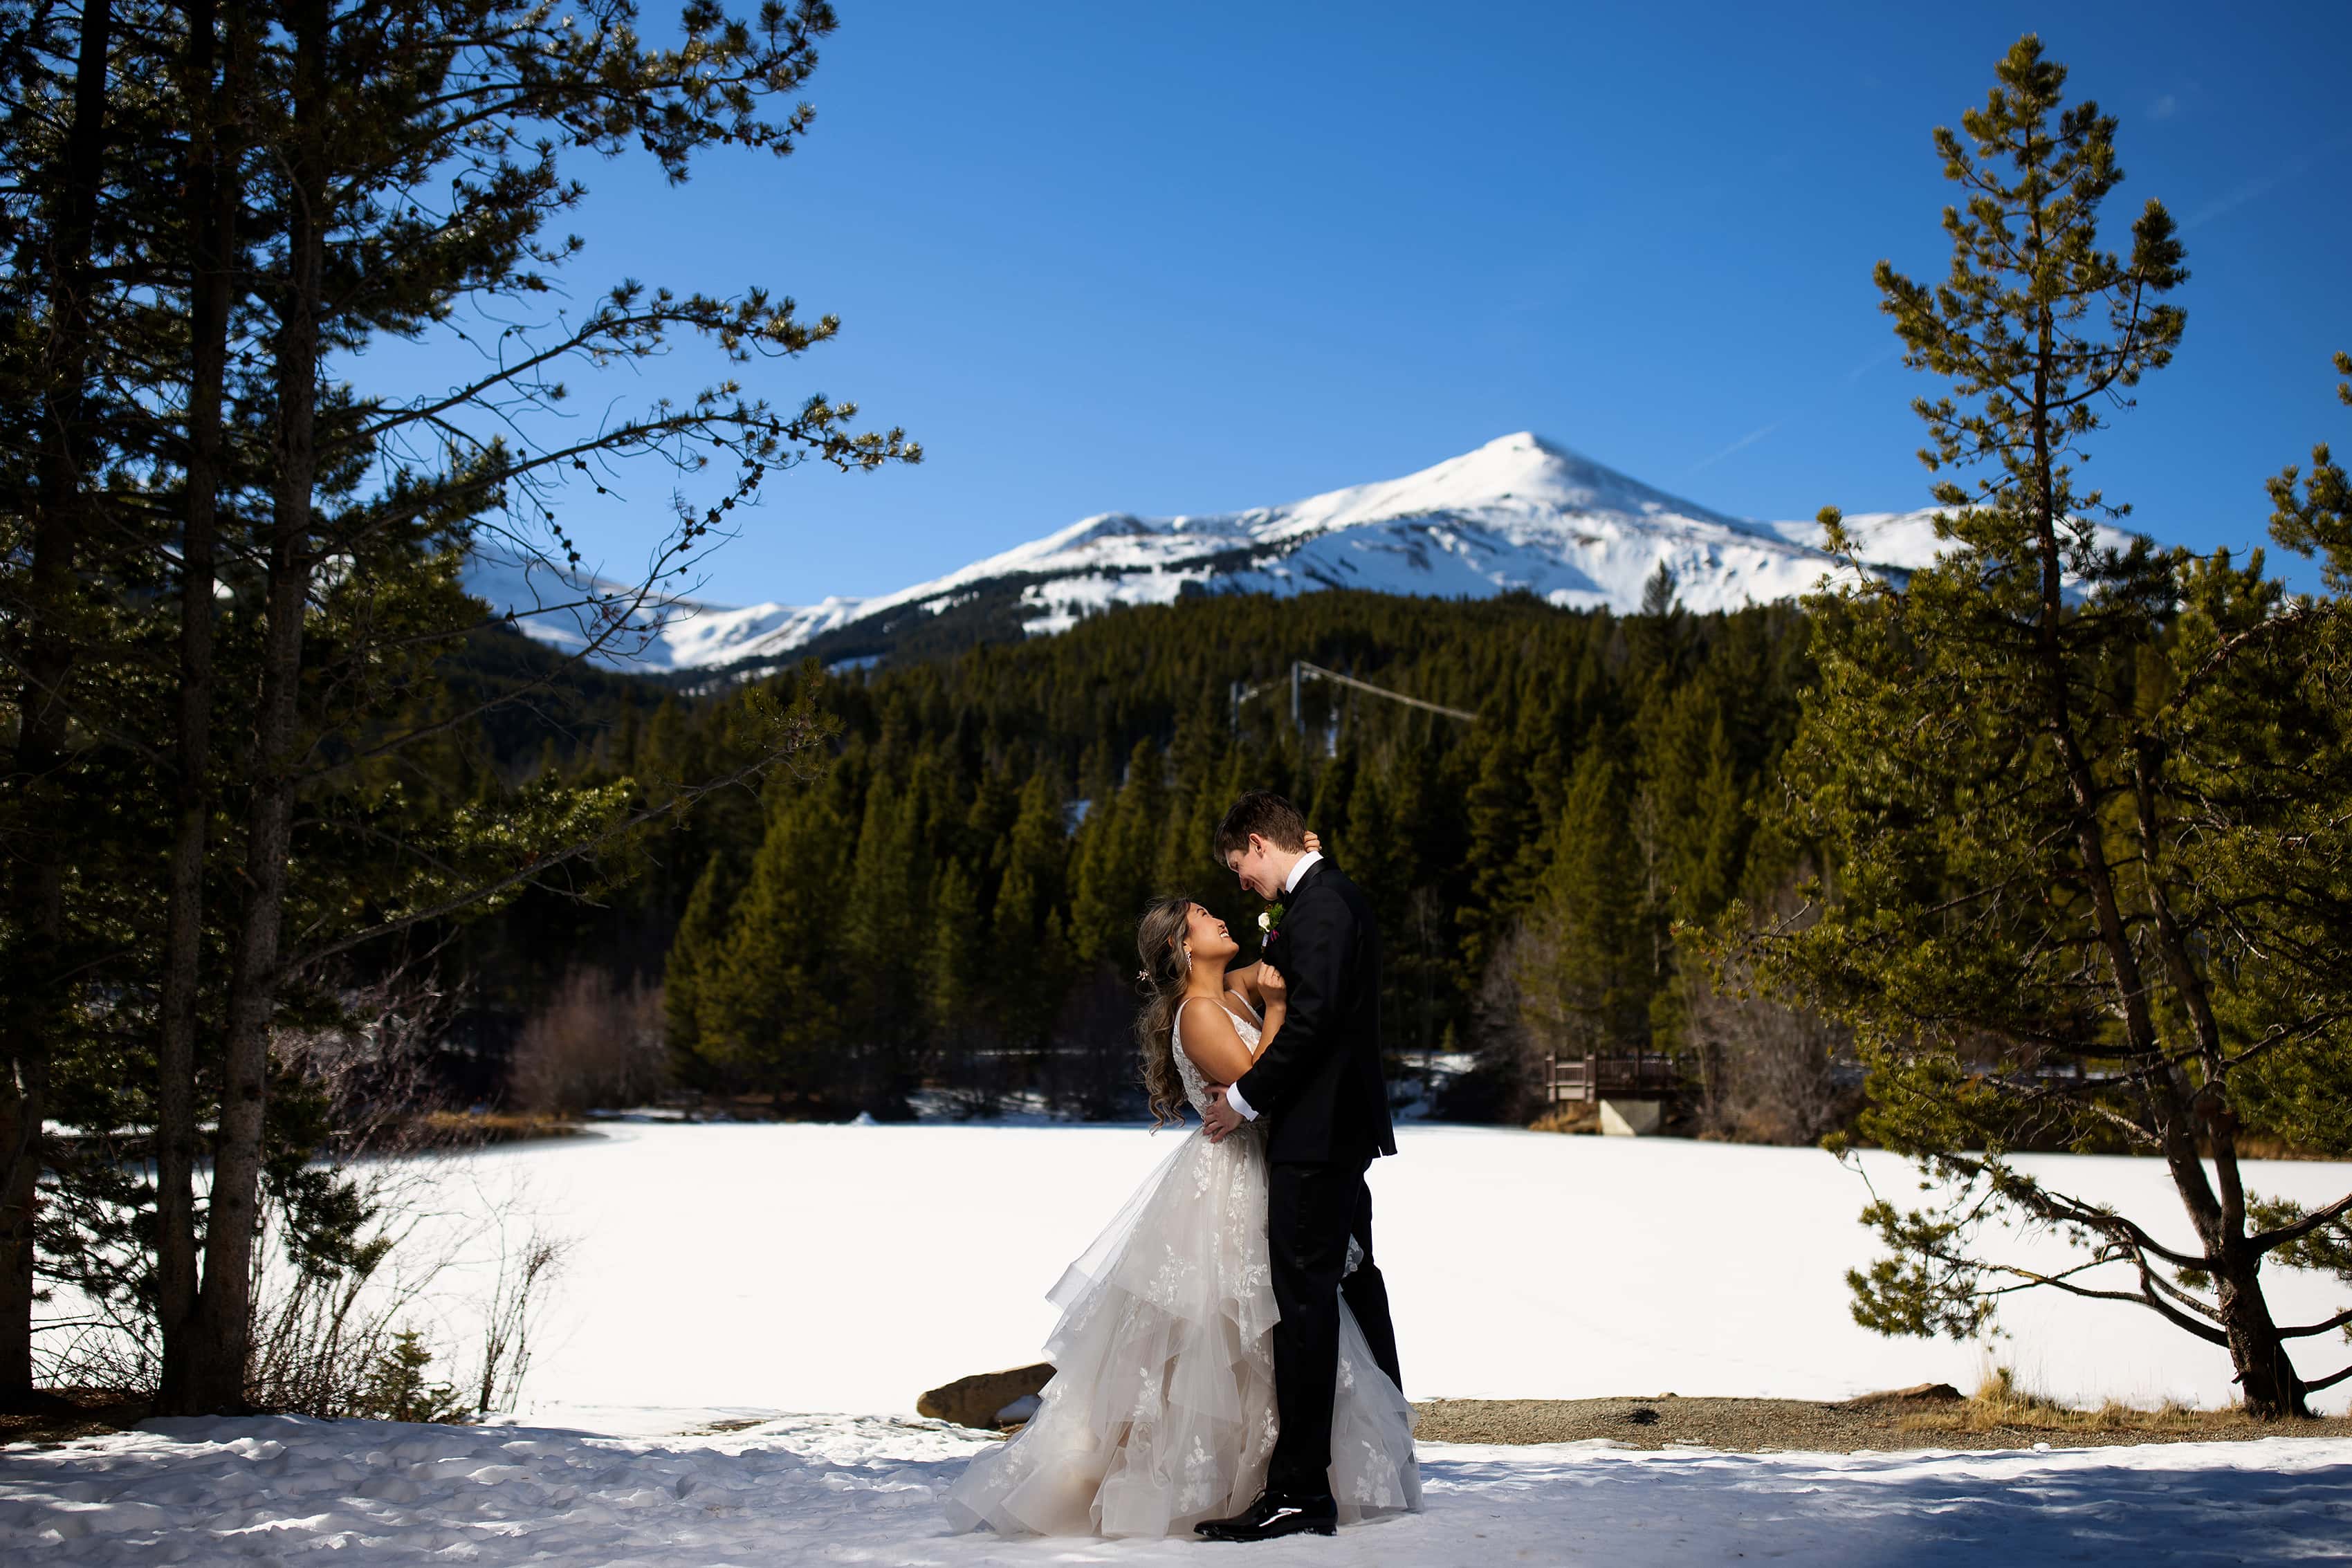 Chris and Julia pose together at Sawmill Reservoir during their winter wedding day